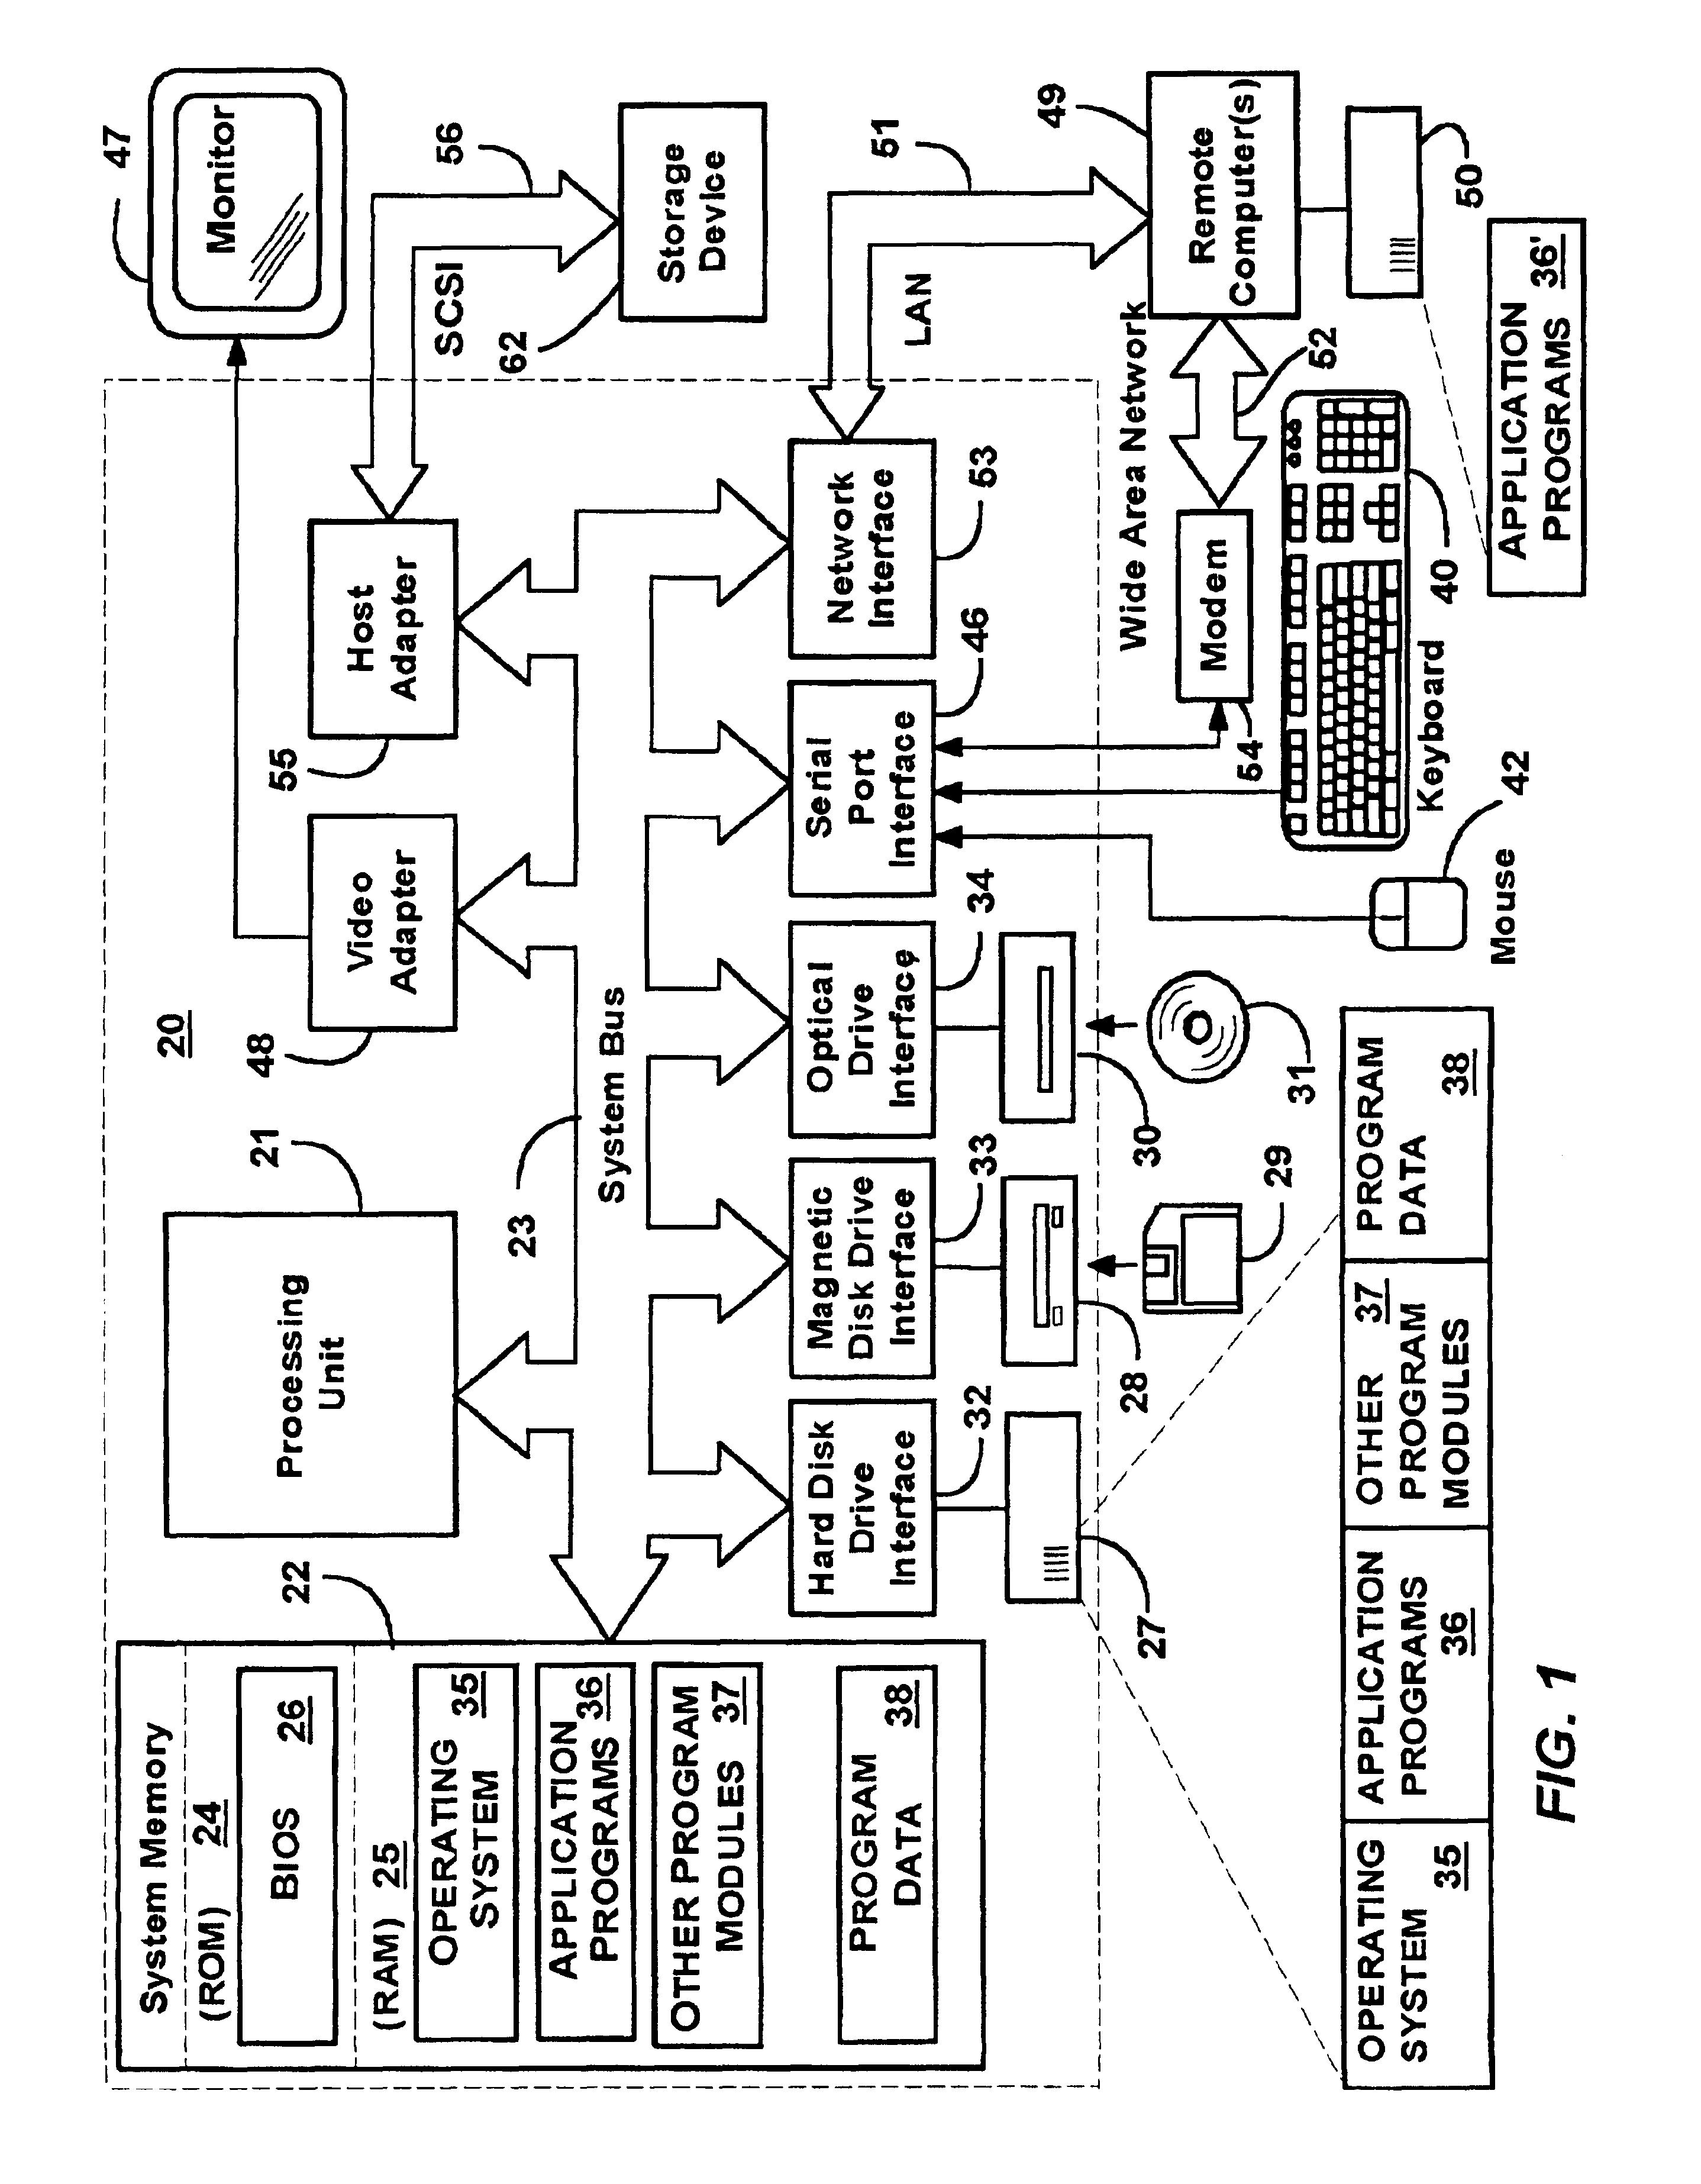 Method and mechanism for providing computer programs with computer system events